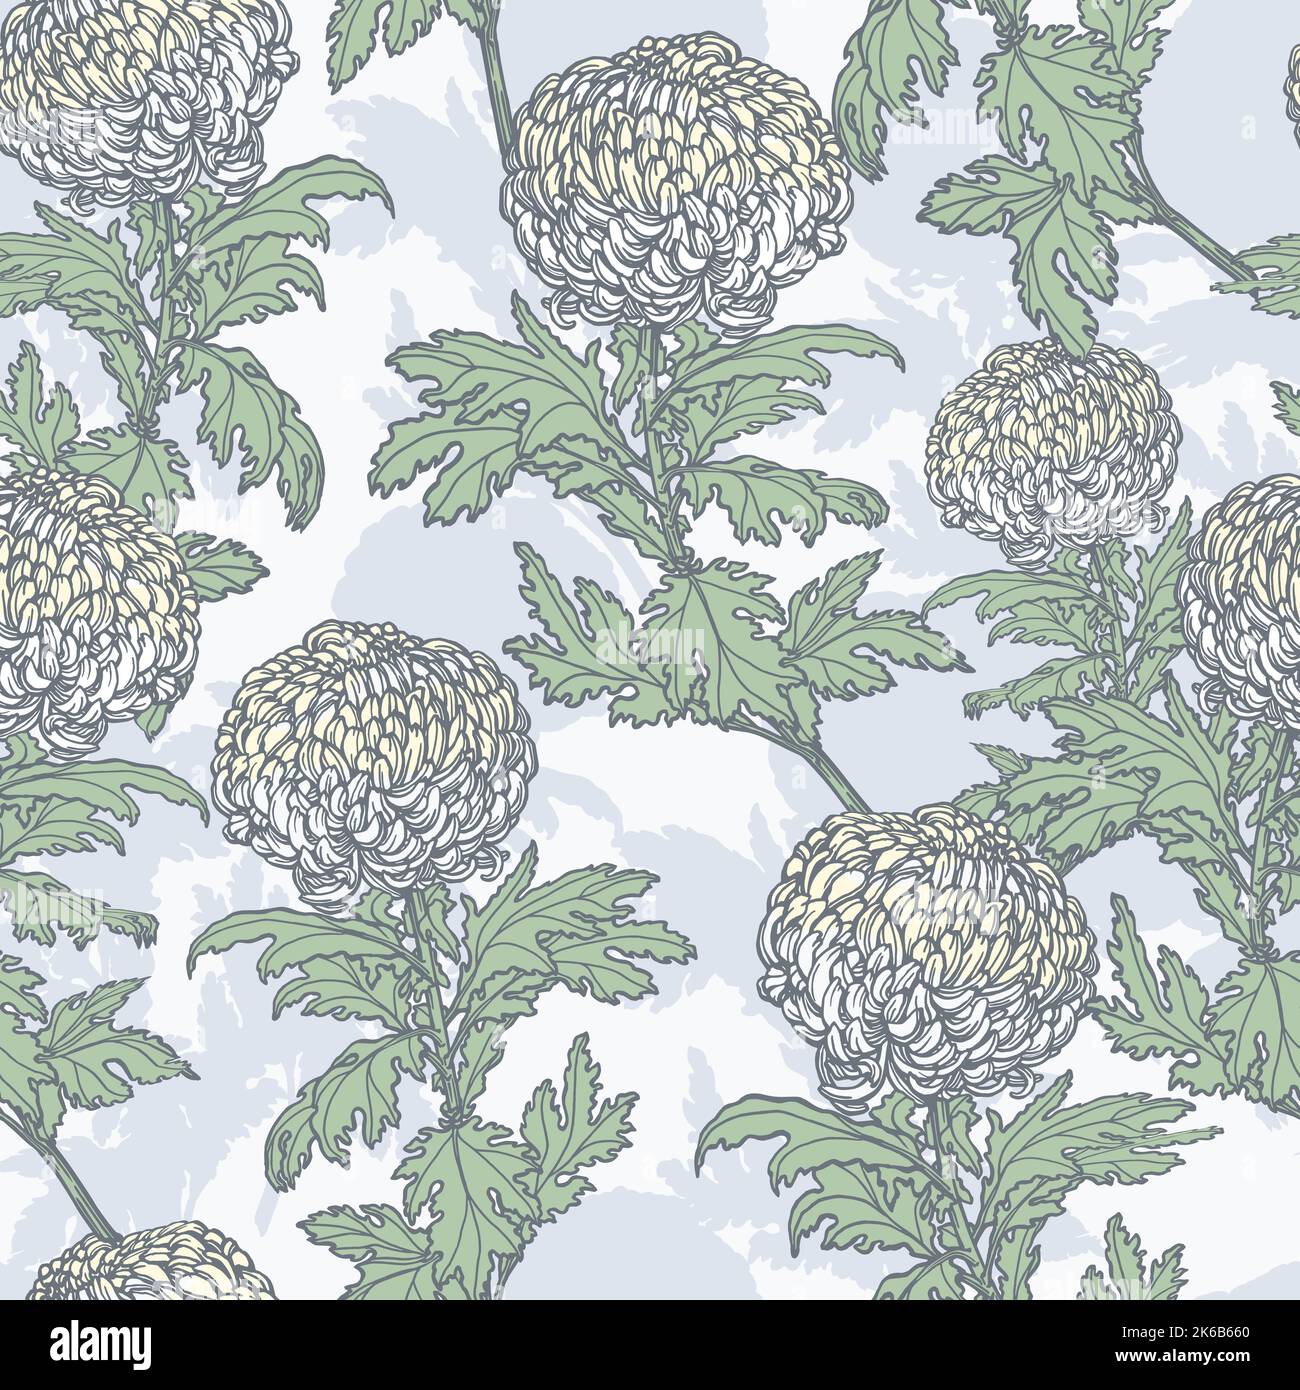 Floral seamless pattern with chrysanthemums. Hand drawn with pen and ink design. Vector tile pattern on light gray background. Stock Vector